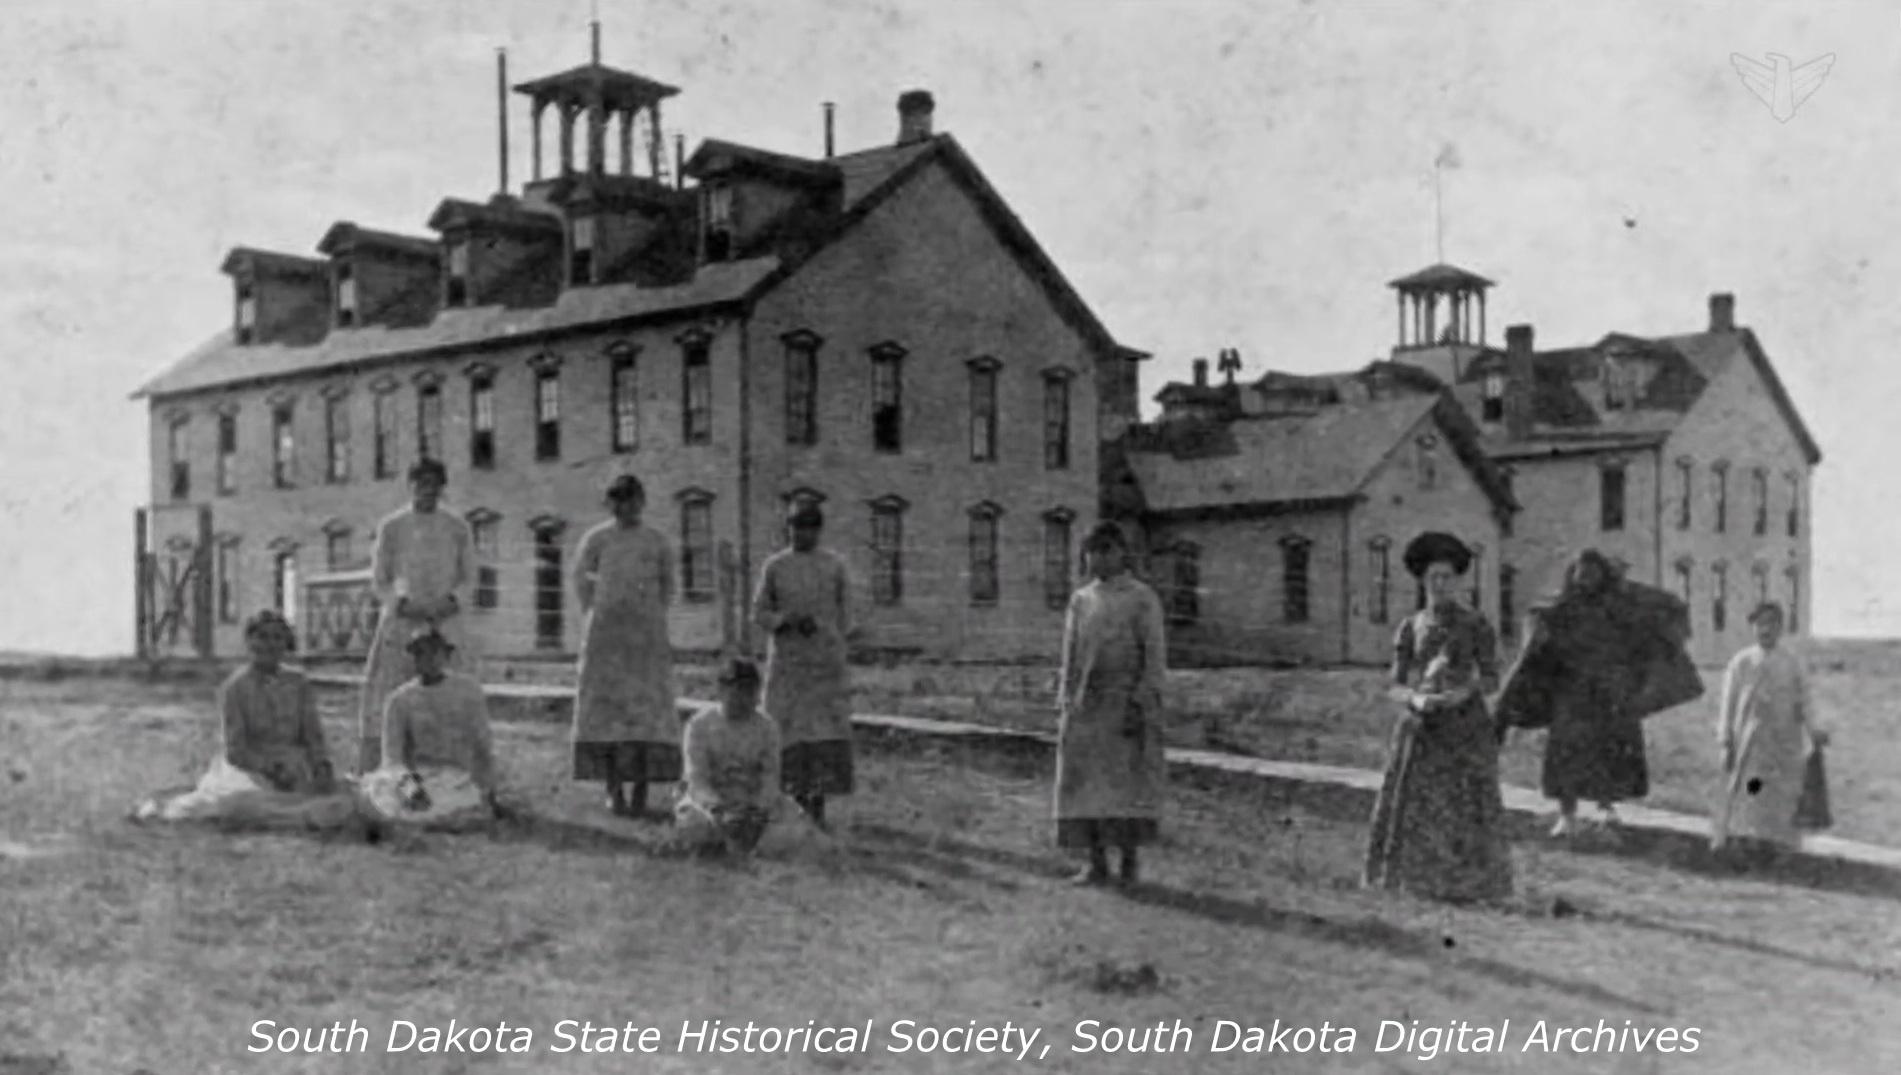 Oglala Boarding School, Pine Ridge SD - 9 students and 1 teacher are shown with three buildings in the background. Three of the students are sitting on the ground and the rest are standing. They are all wearing long dresses.   